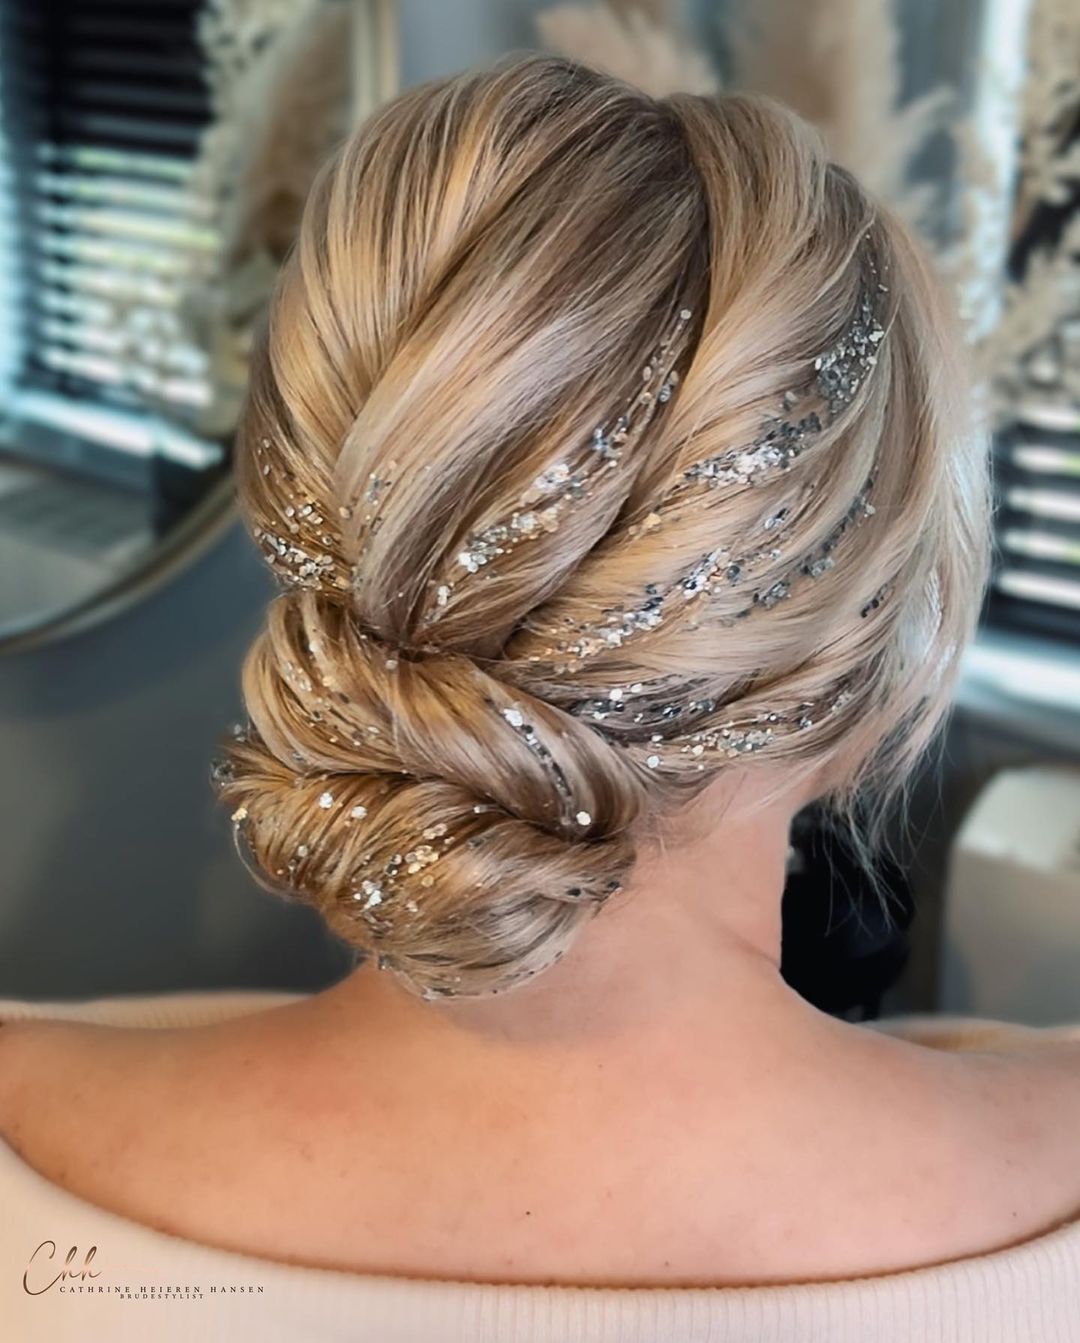 sequined chic updo hairstyle for maid of honor via cathrineheierenhansen